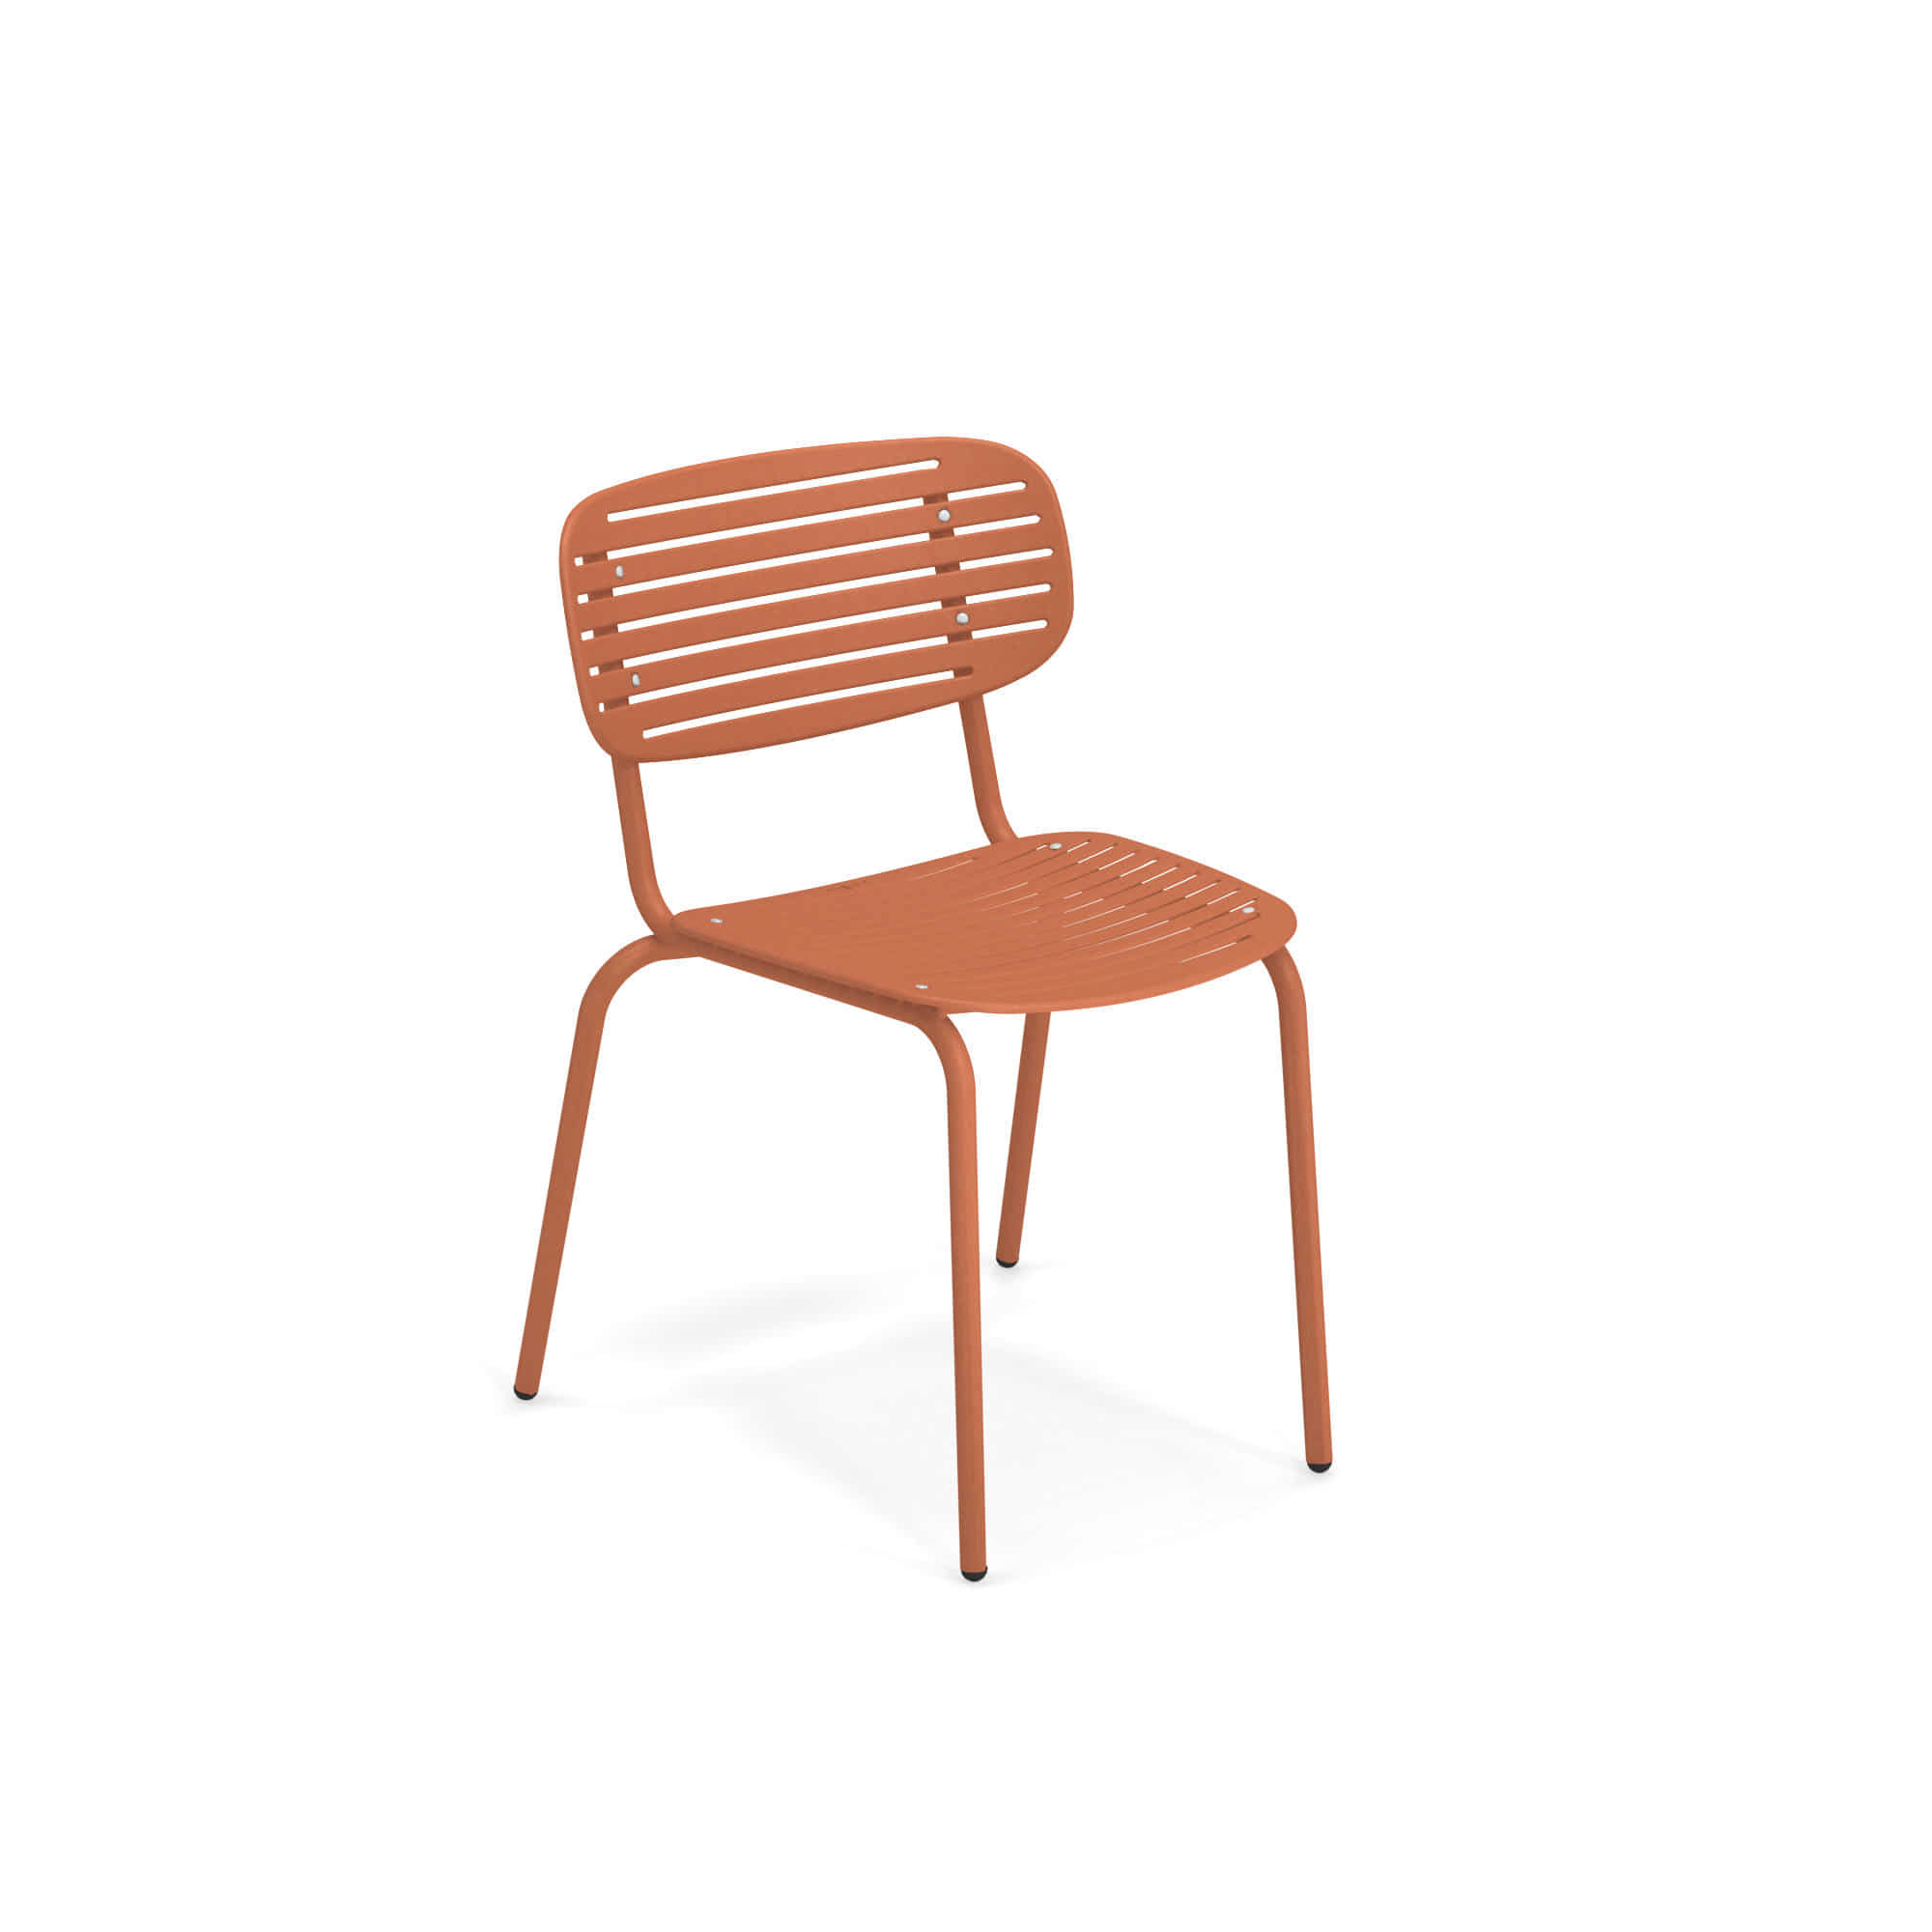 EMU 에뮤 MOM CHAIR - Maple Red